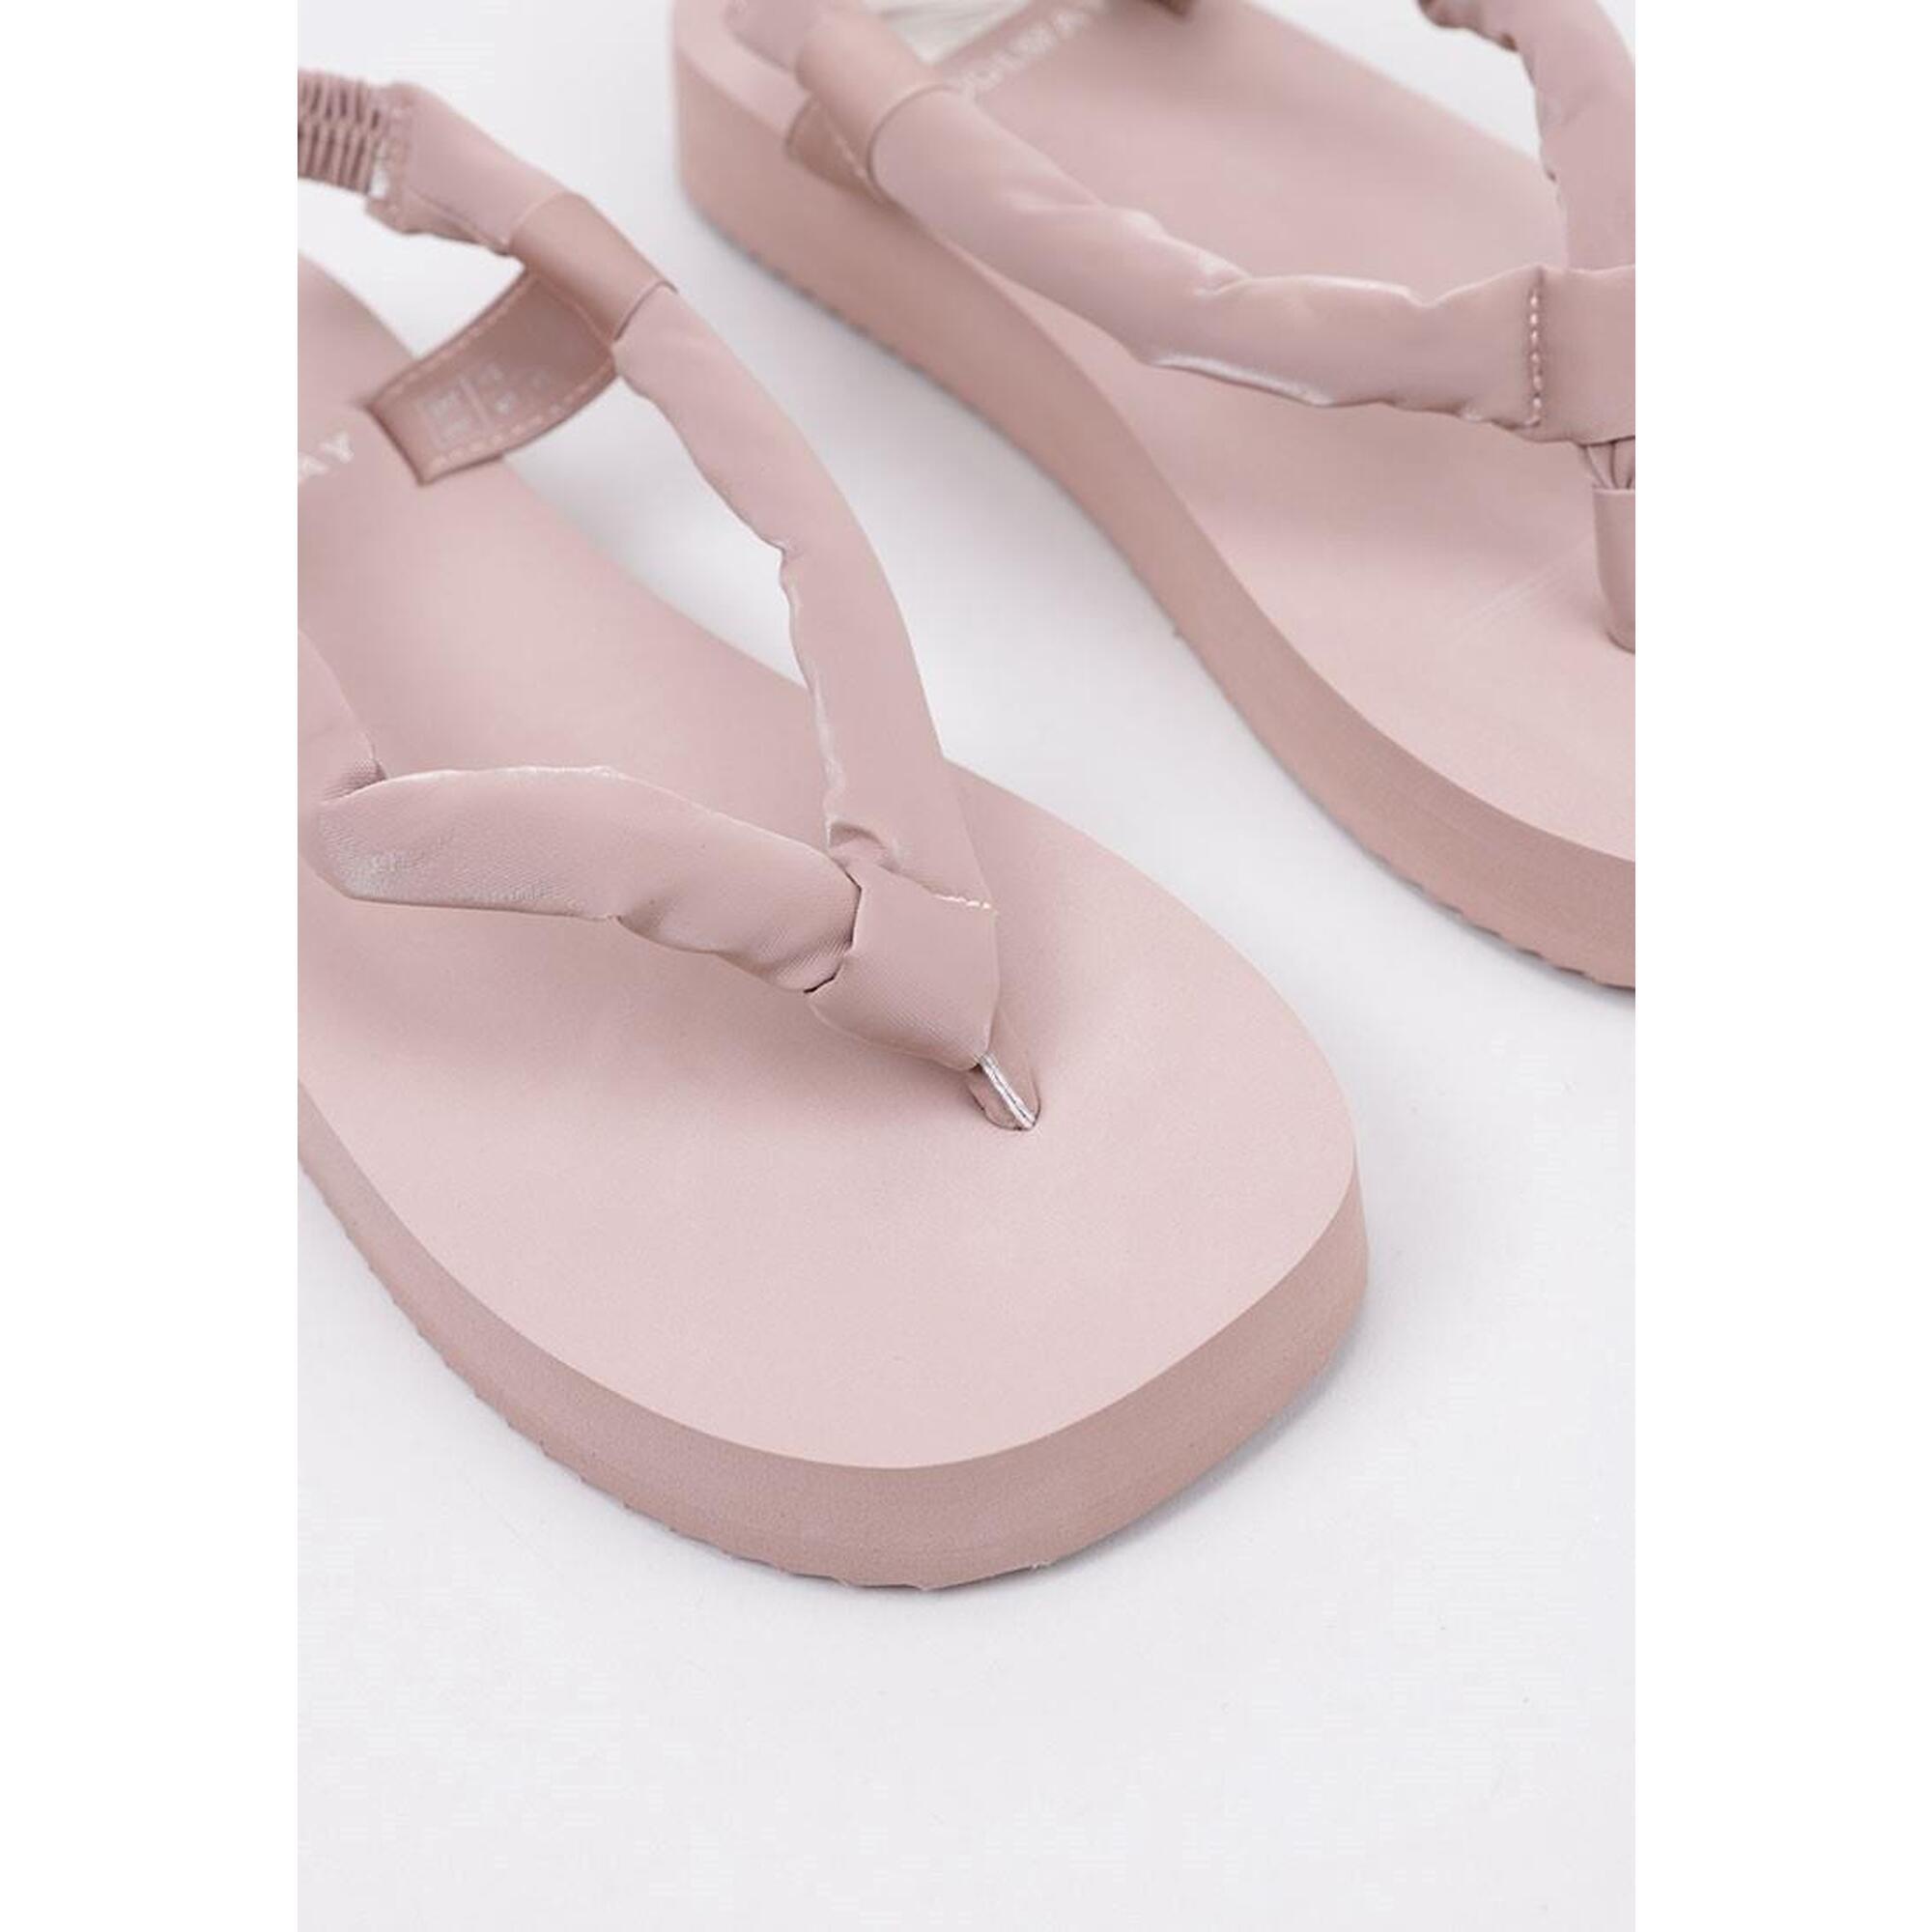 Chanclas Surf Mujer Coolway ARTCUSH Rosa